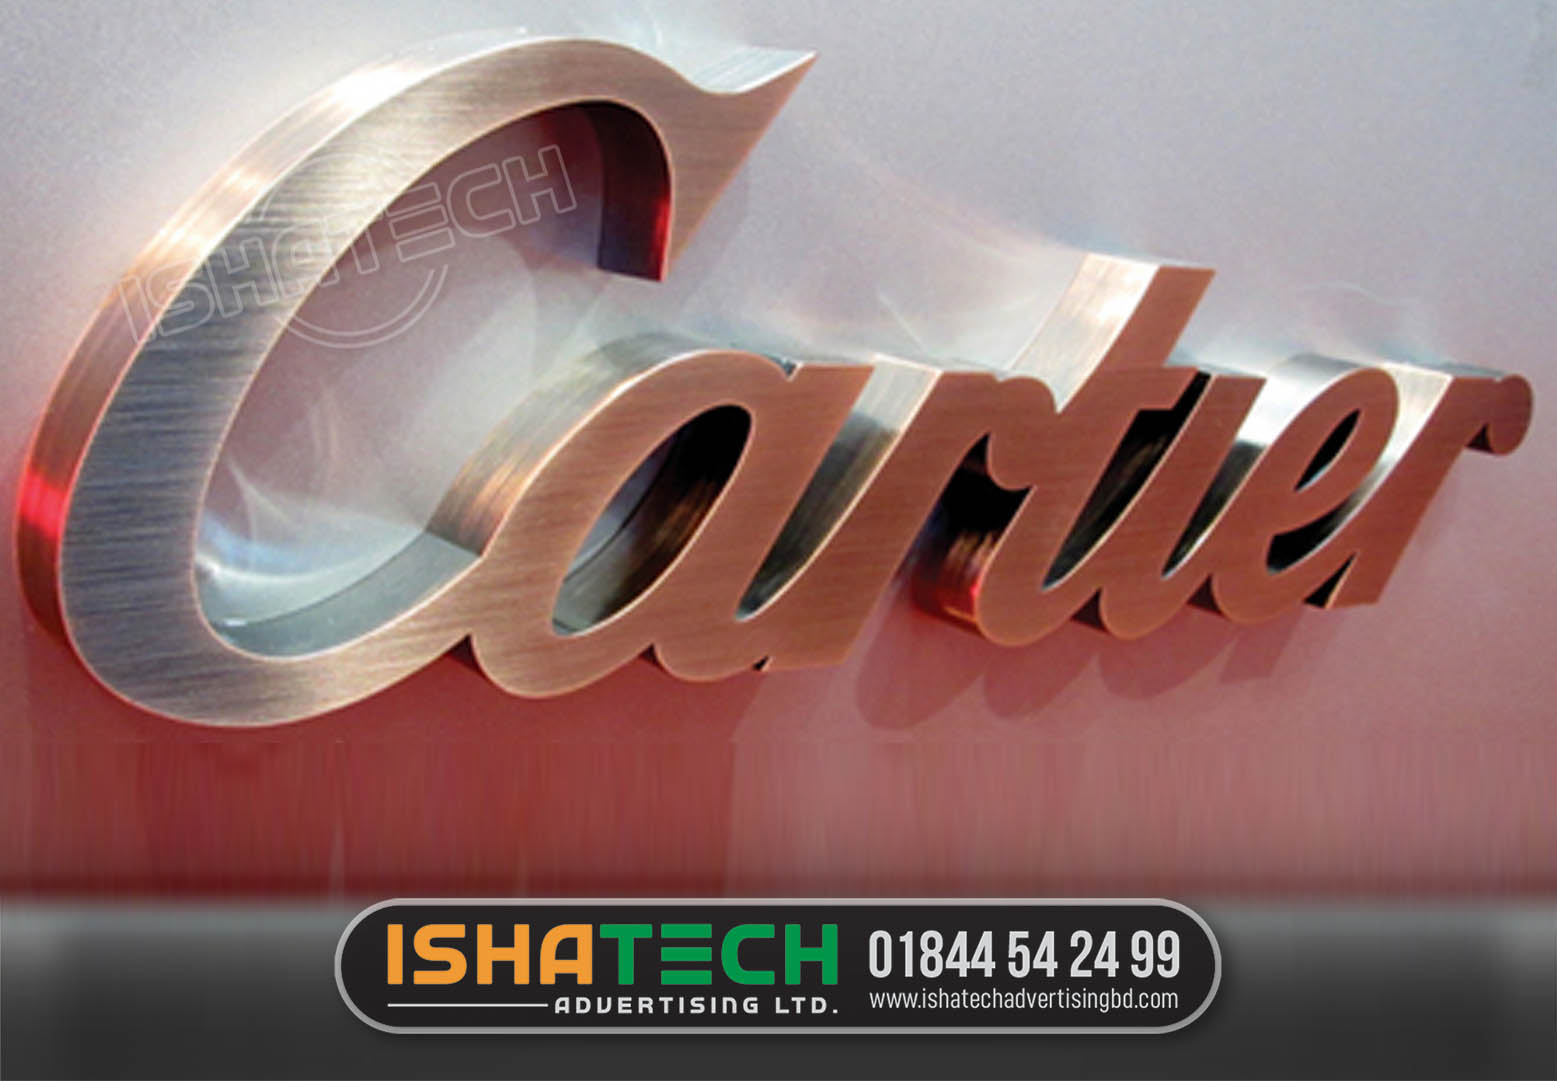 Ishatech Advertising Ltd is a manufacturer all kinds of letter signage acrylic SS Golden Copper Letter Signage, Bangladesh Mirror Metal Copper SS Top Letter Signboard for Indoor and Outdoor. SS Sign Board SS Top Letter Acrylic Top Letter SS Metal.